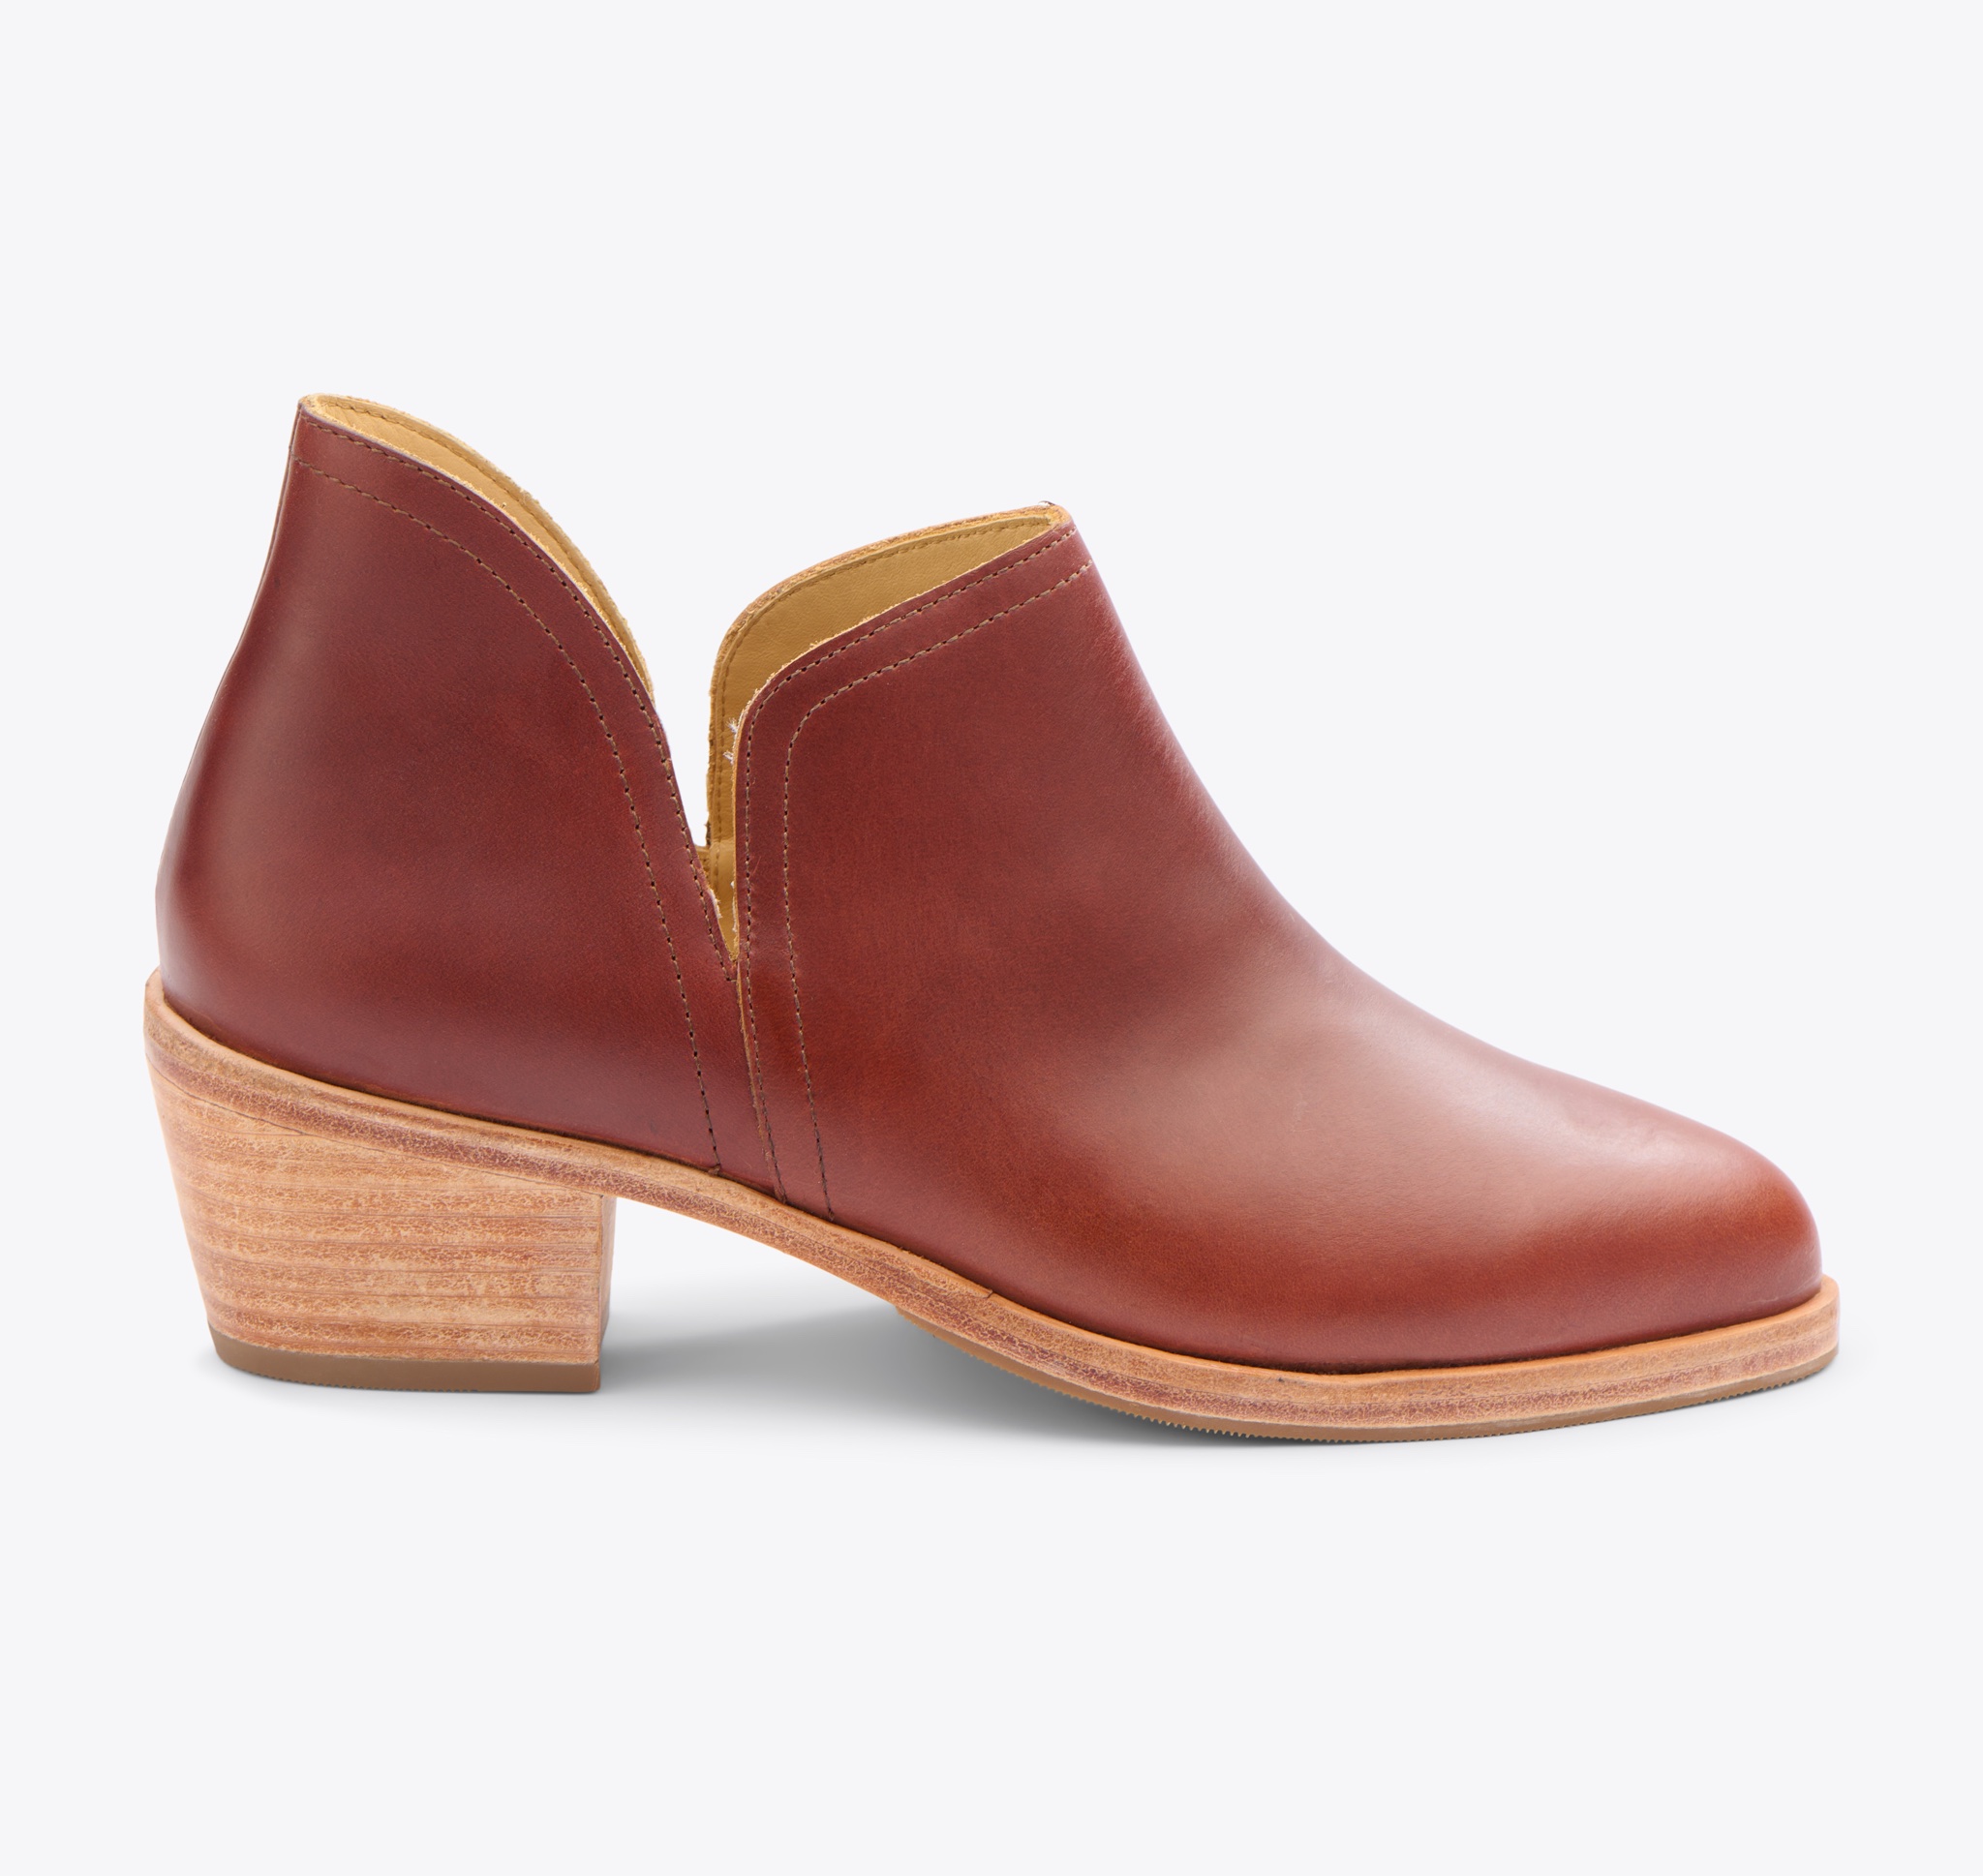 Nisolo Everyday Ankle Bootie Brandy - Every Nisolo product is built on the foundation of comfort, function, and design. 